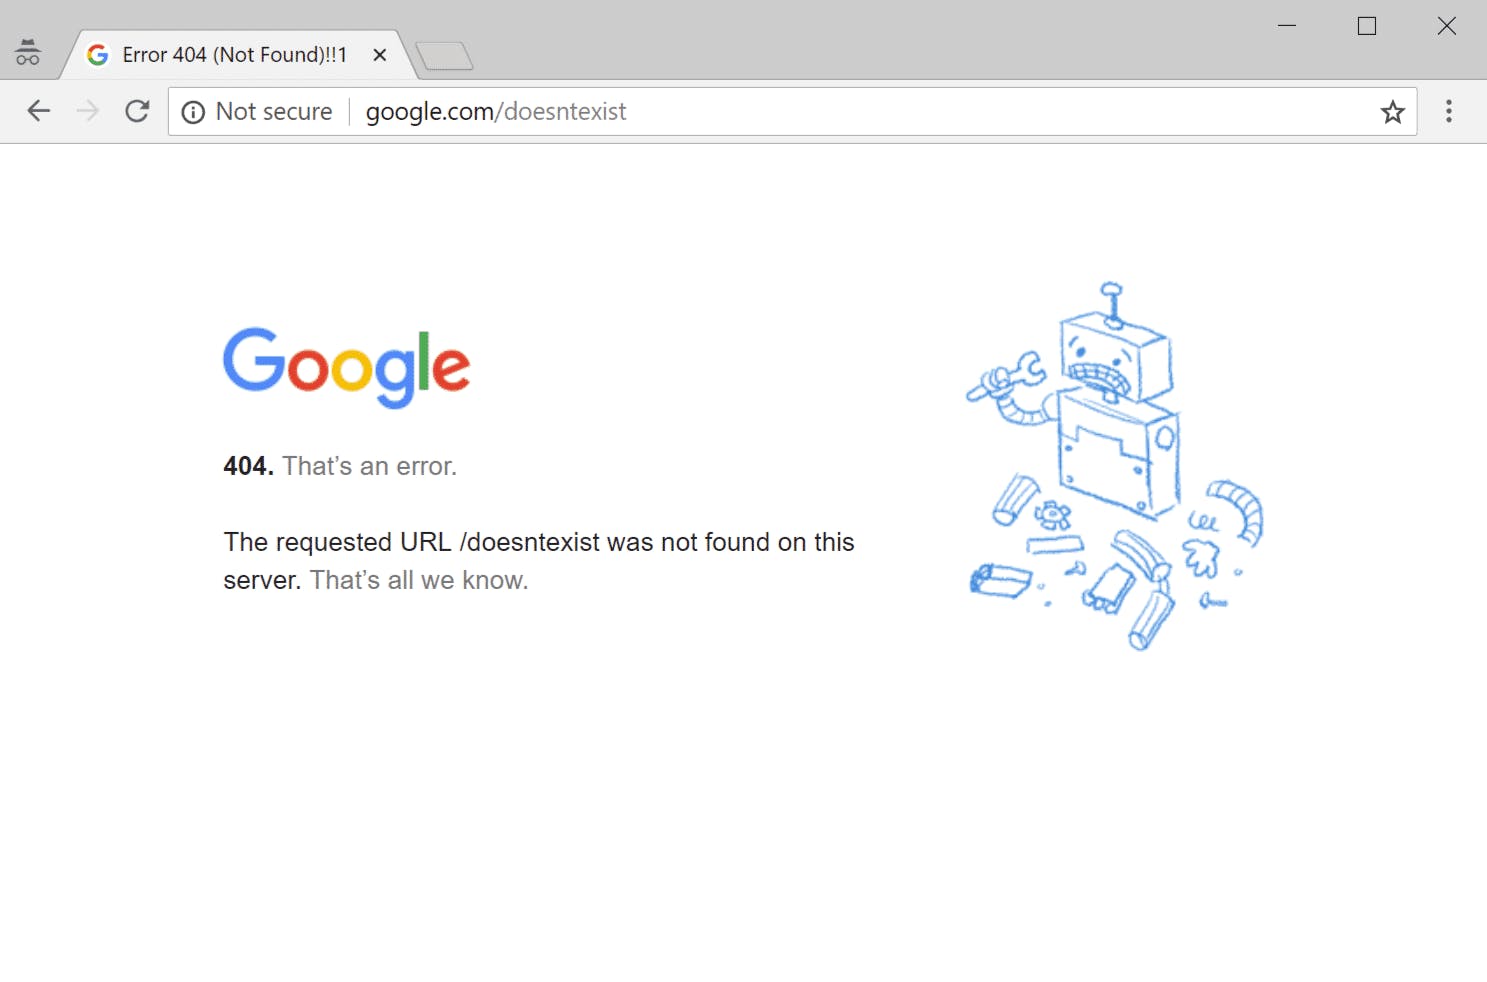 google-404-error-page-1.png